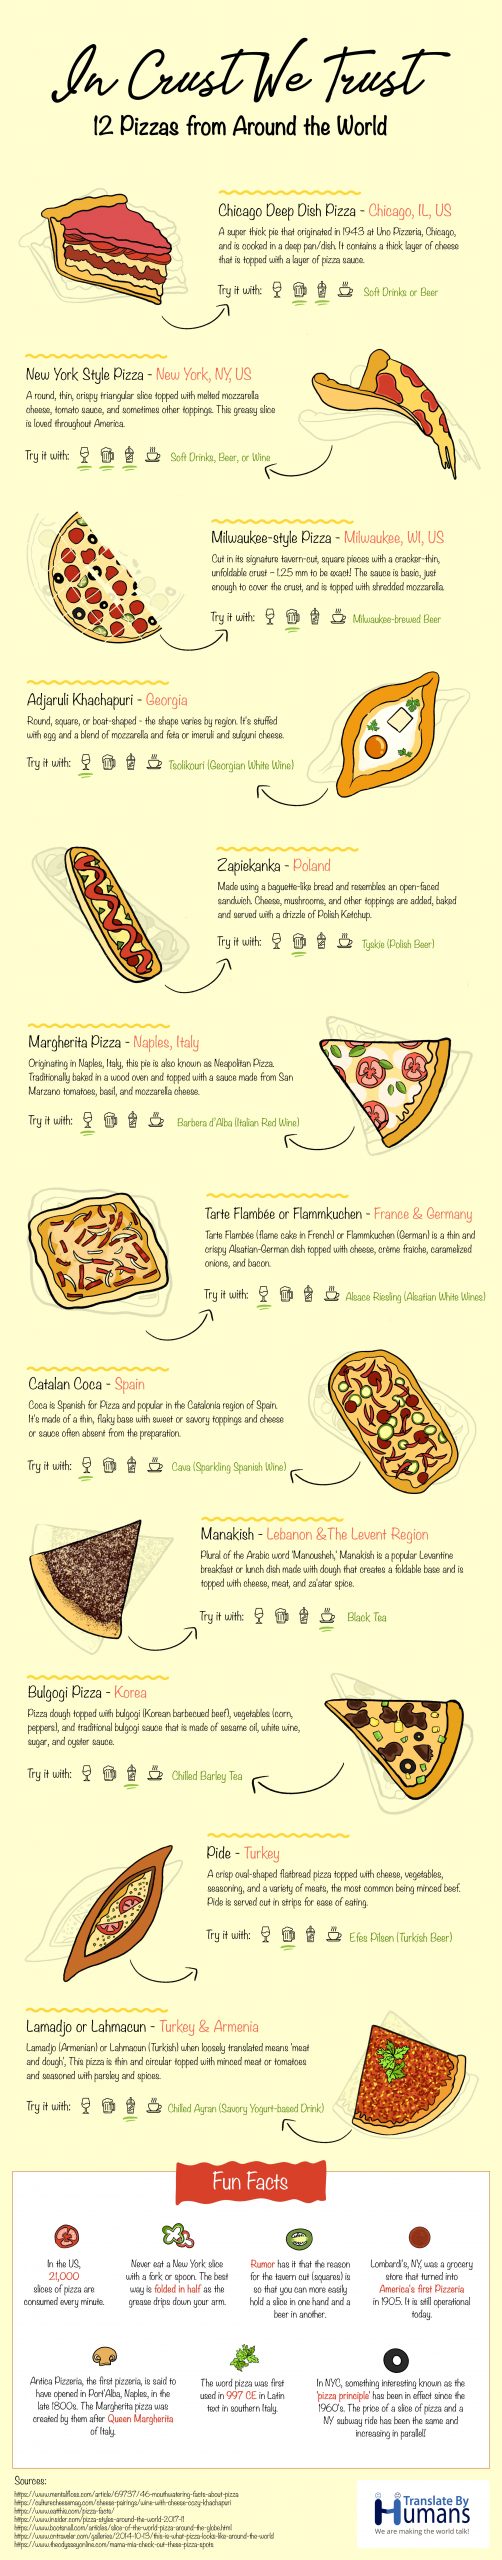 Pizza from around the world infographic